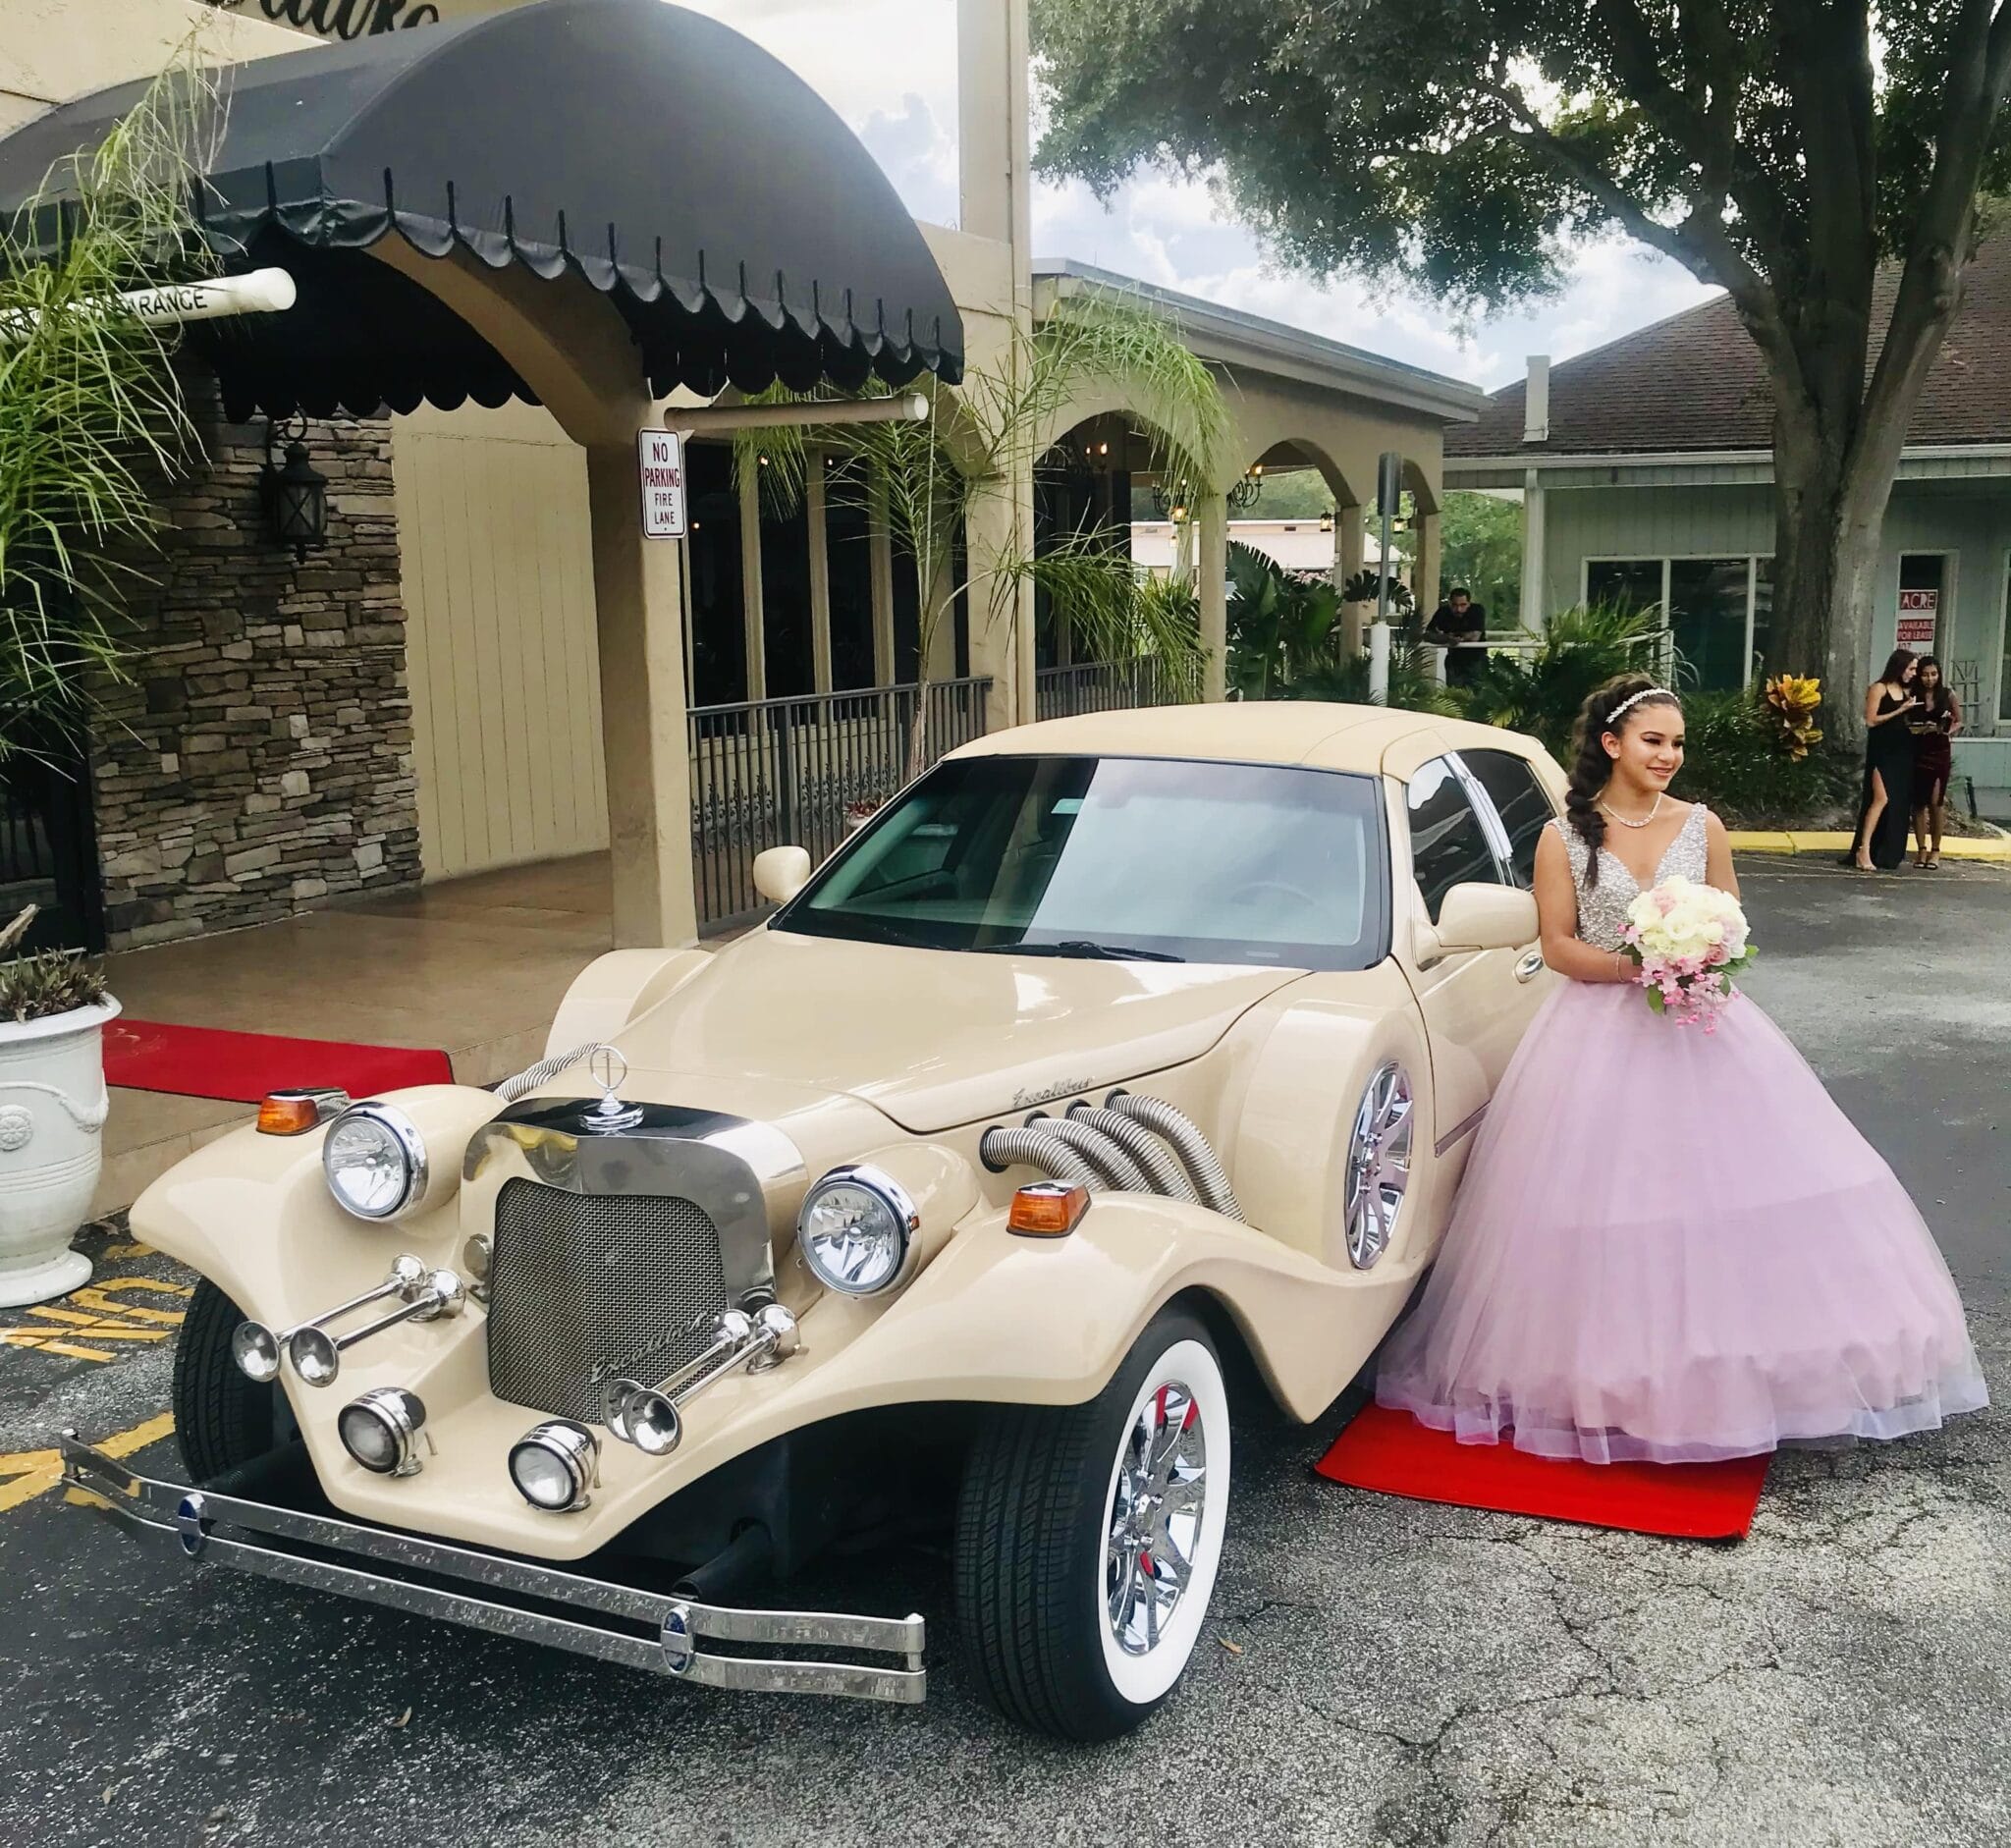 A young girl stands by the Excalibur Godfather from Exotic Limo before her celebration.